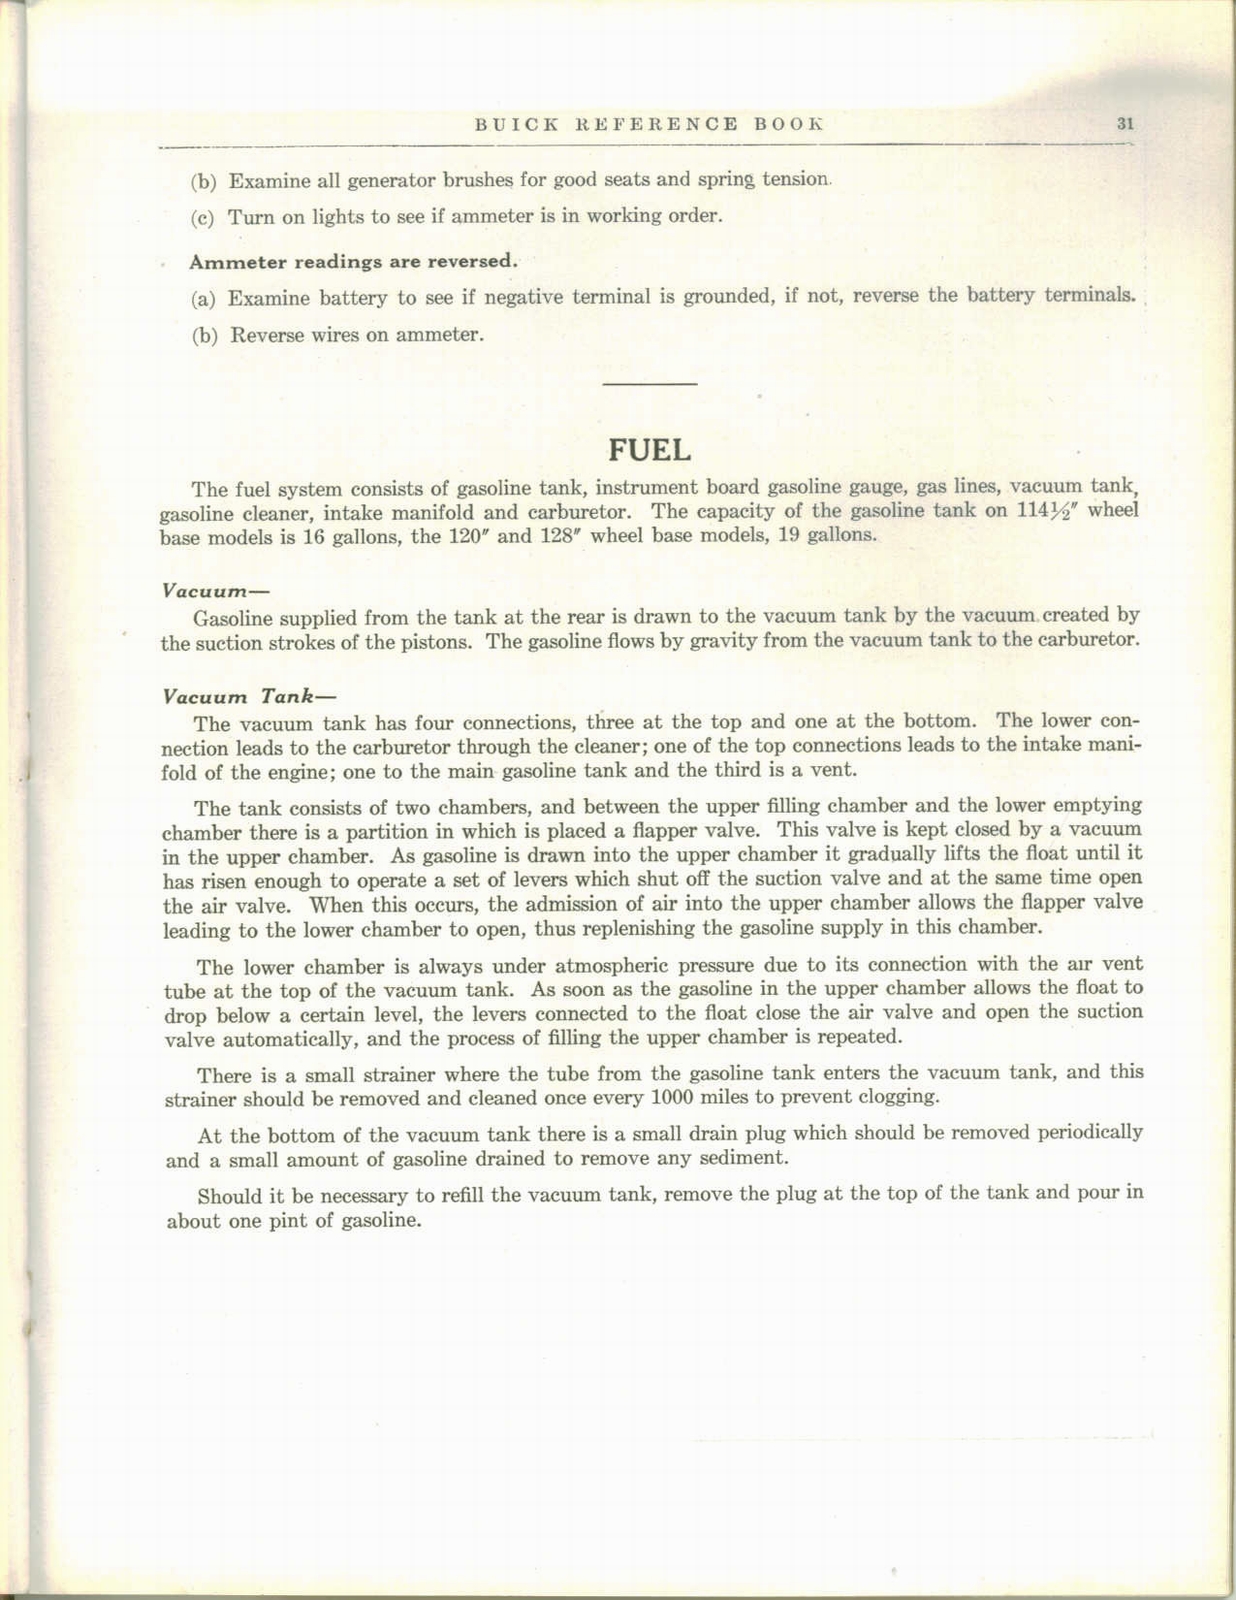 n_1928 Buick Reference Book-31.jpg